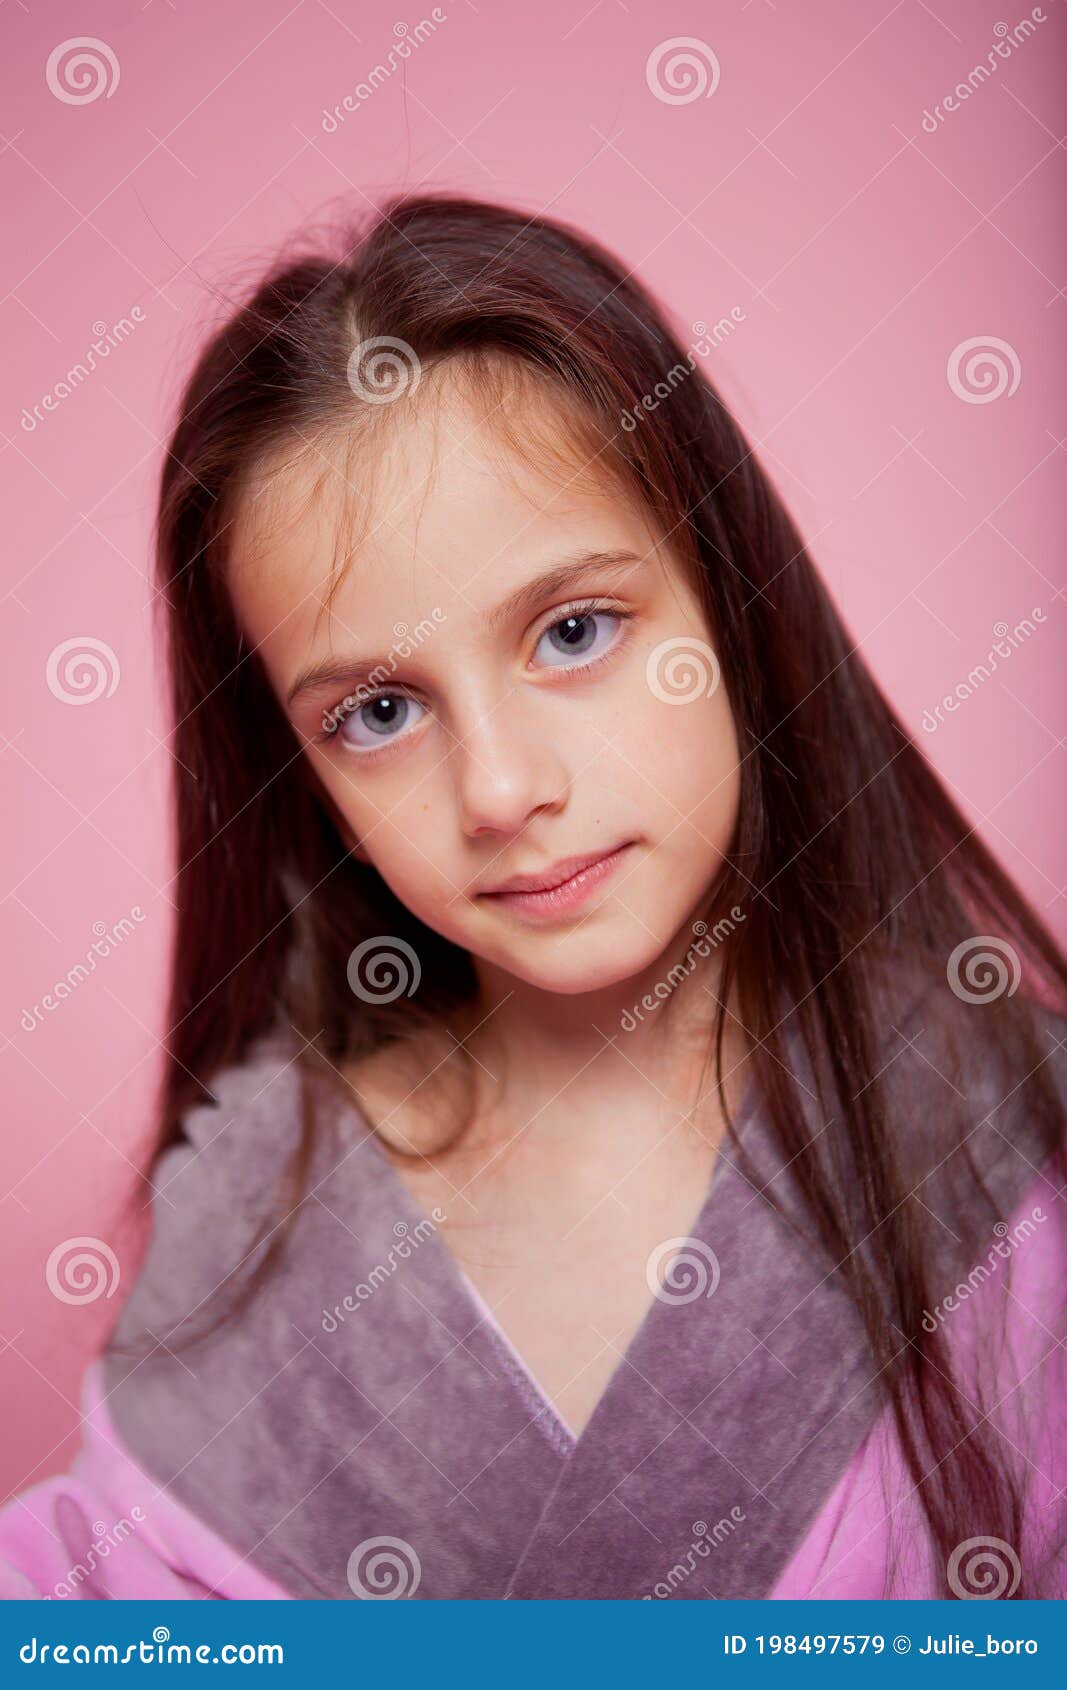 Long Haired Girl With Big Eyes In A Pink Bathrobe Stock Image Image